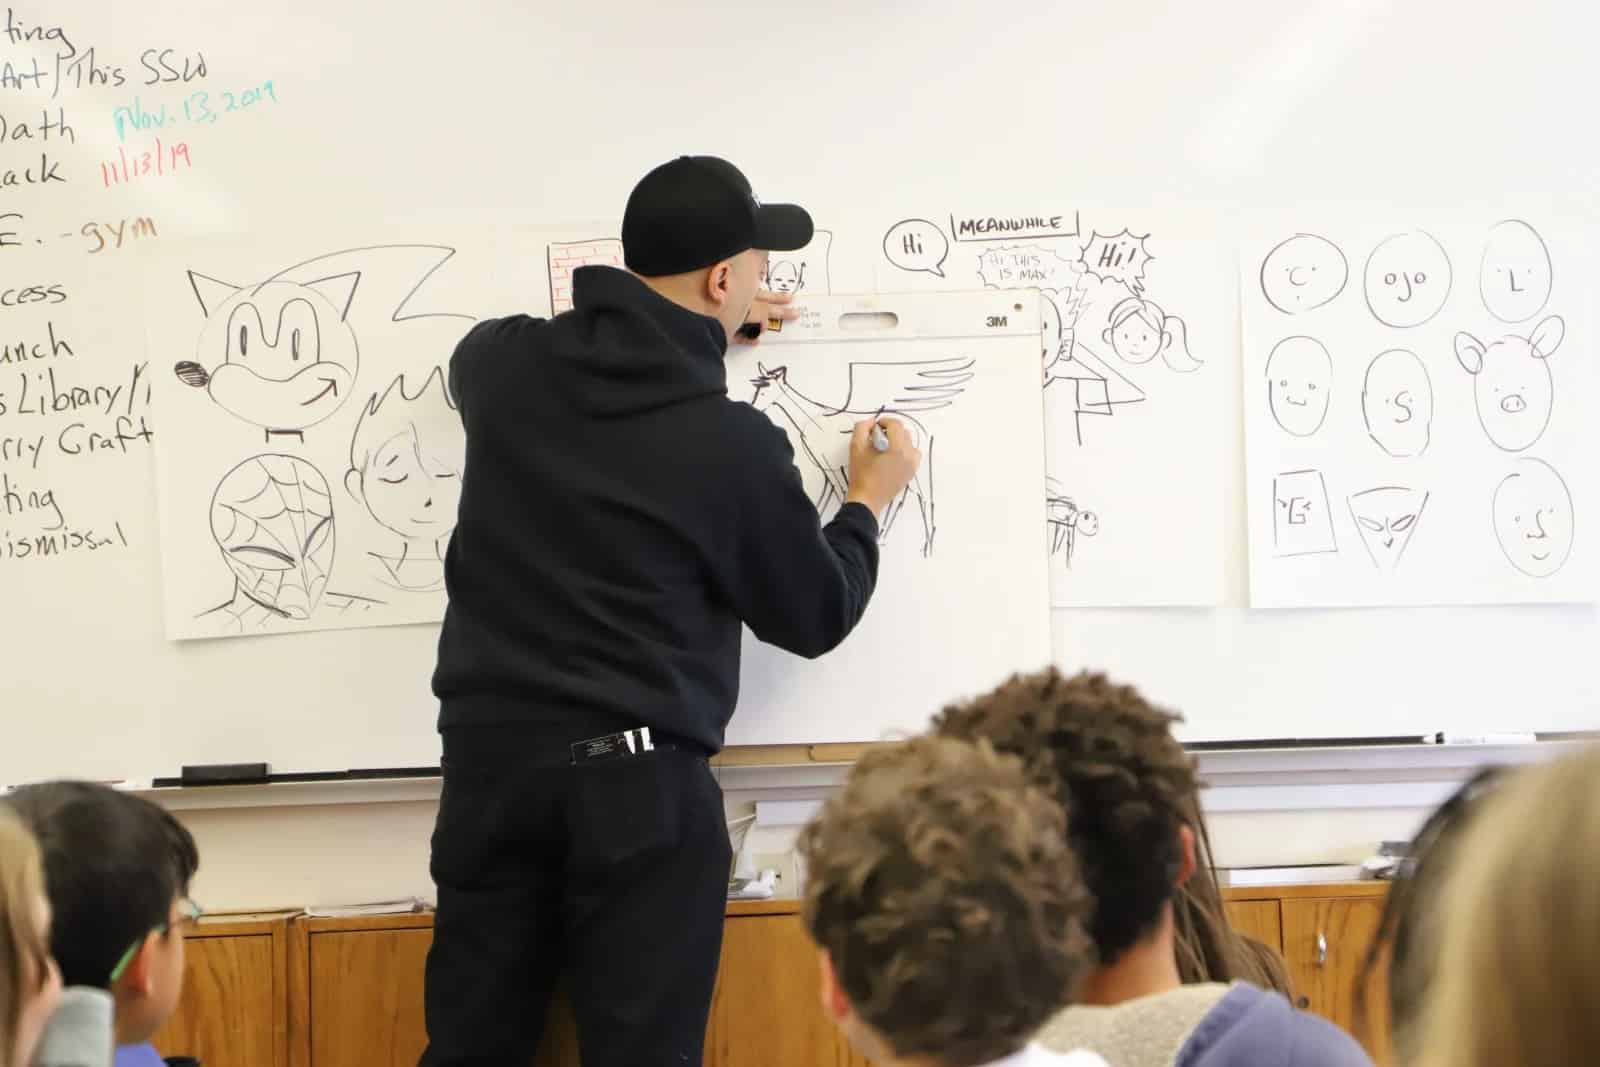 Craft draws animal on whiteboard while students look on